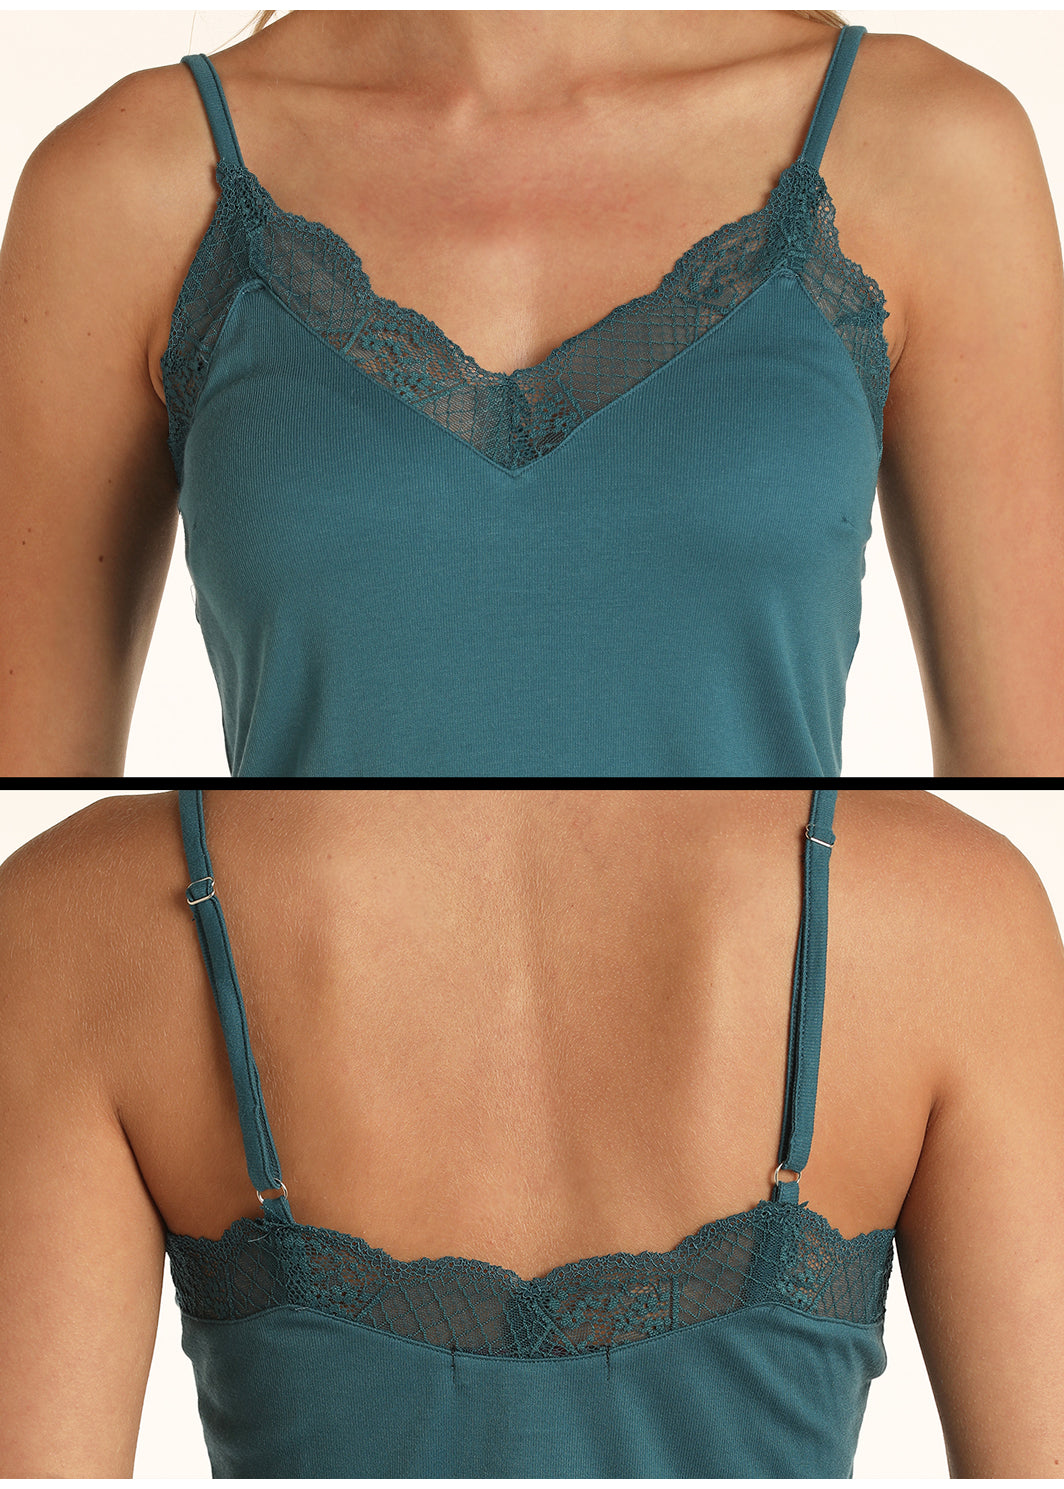 Rock & Roll Lace Trim Camisole Top - Teal